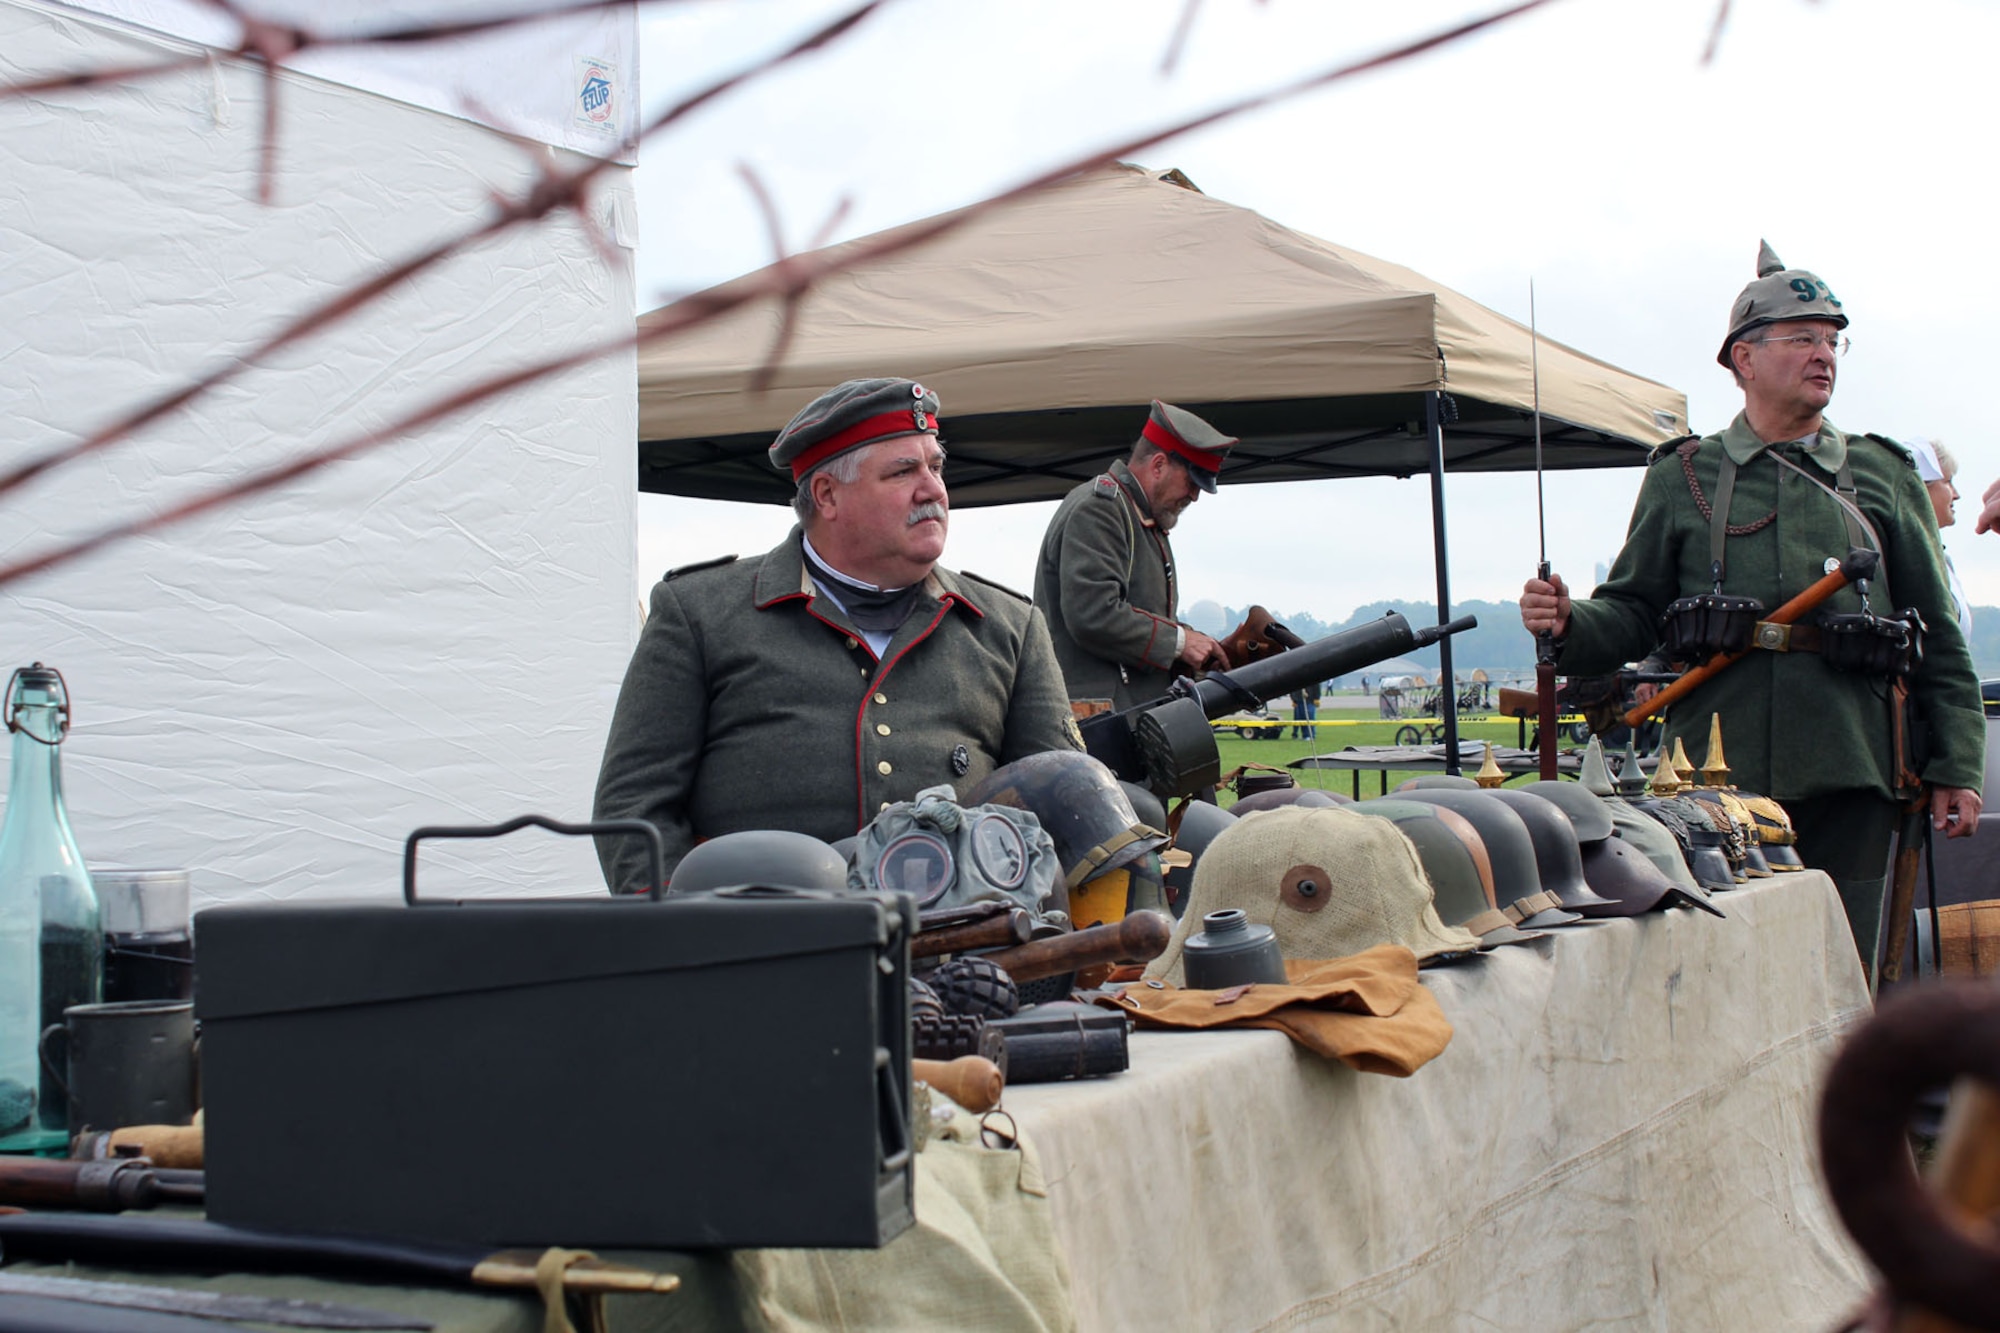 Several reenactors participated in the World War I Dawn Patrol Rendezvous in 2011 at the National Museum of the U.S. Air Force near Dayton, Ohio. This year's event is schedule to take place Sept. 27-28. (U.S. Air Force photo)